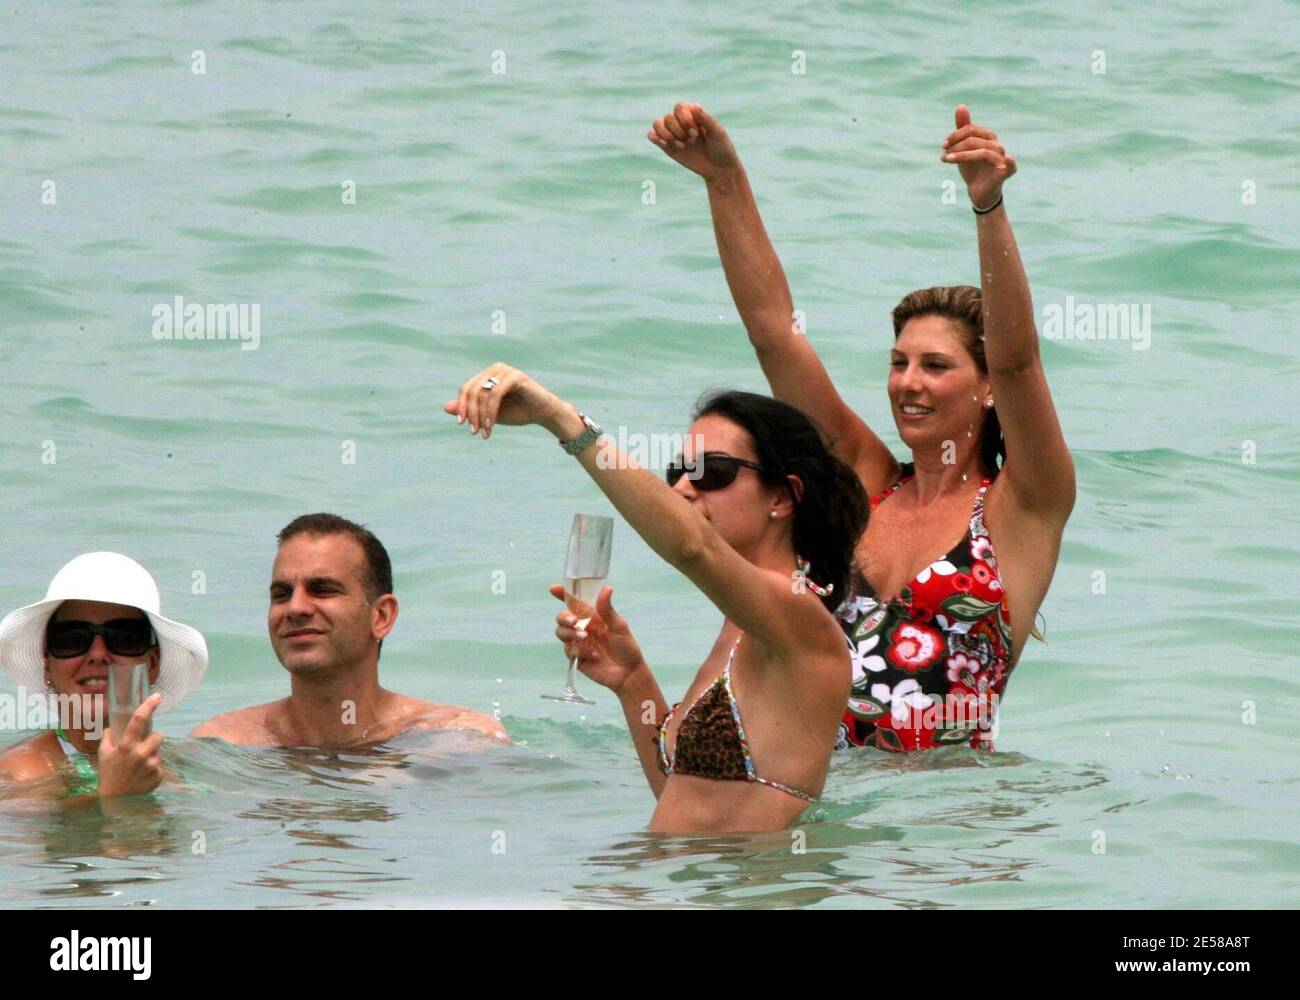 Exclusive!! Hot Latina model and actress Daisy Fuentes enjoys some  champagne and pizza on Miami Beach with friends and family. Miami Beach,  Fla. 6/24/07. [[tag mab]] Stock Photo - Alamy